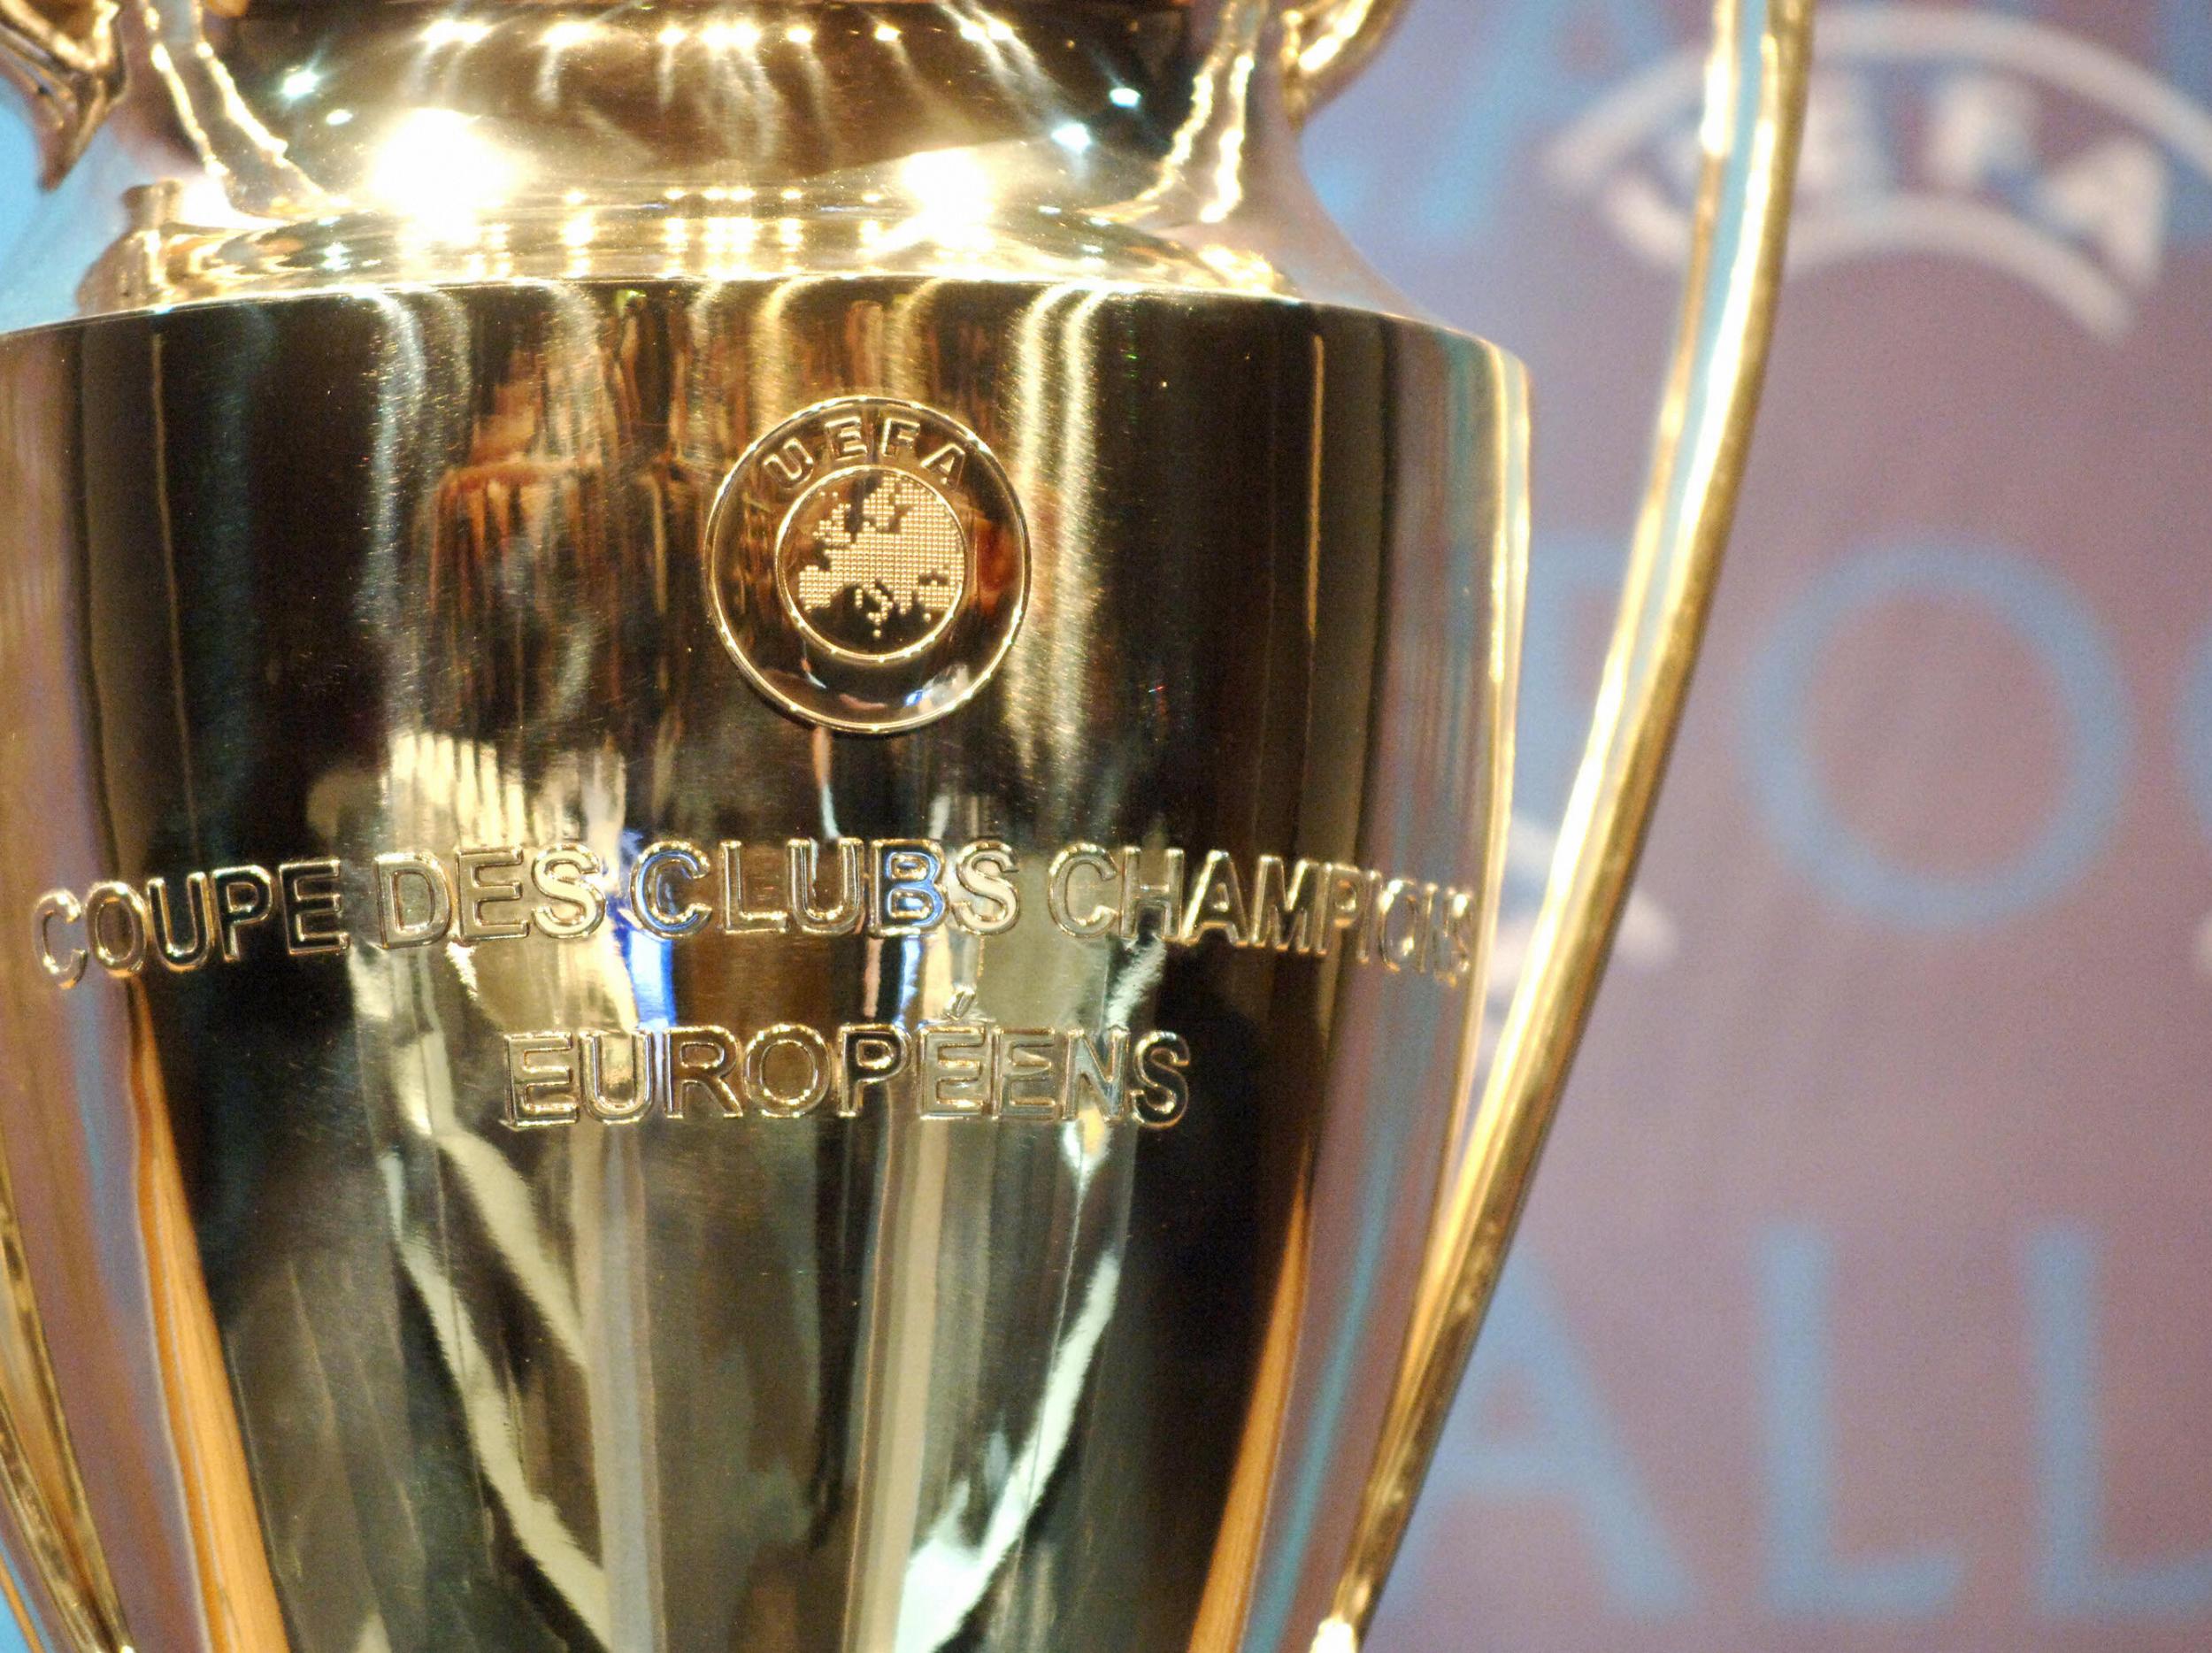 A maximum of five teams from one country can win entry into the Champions League